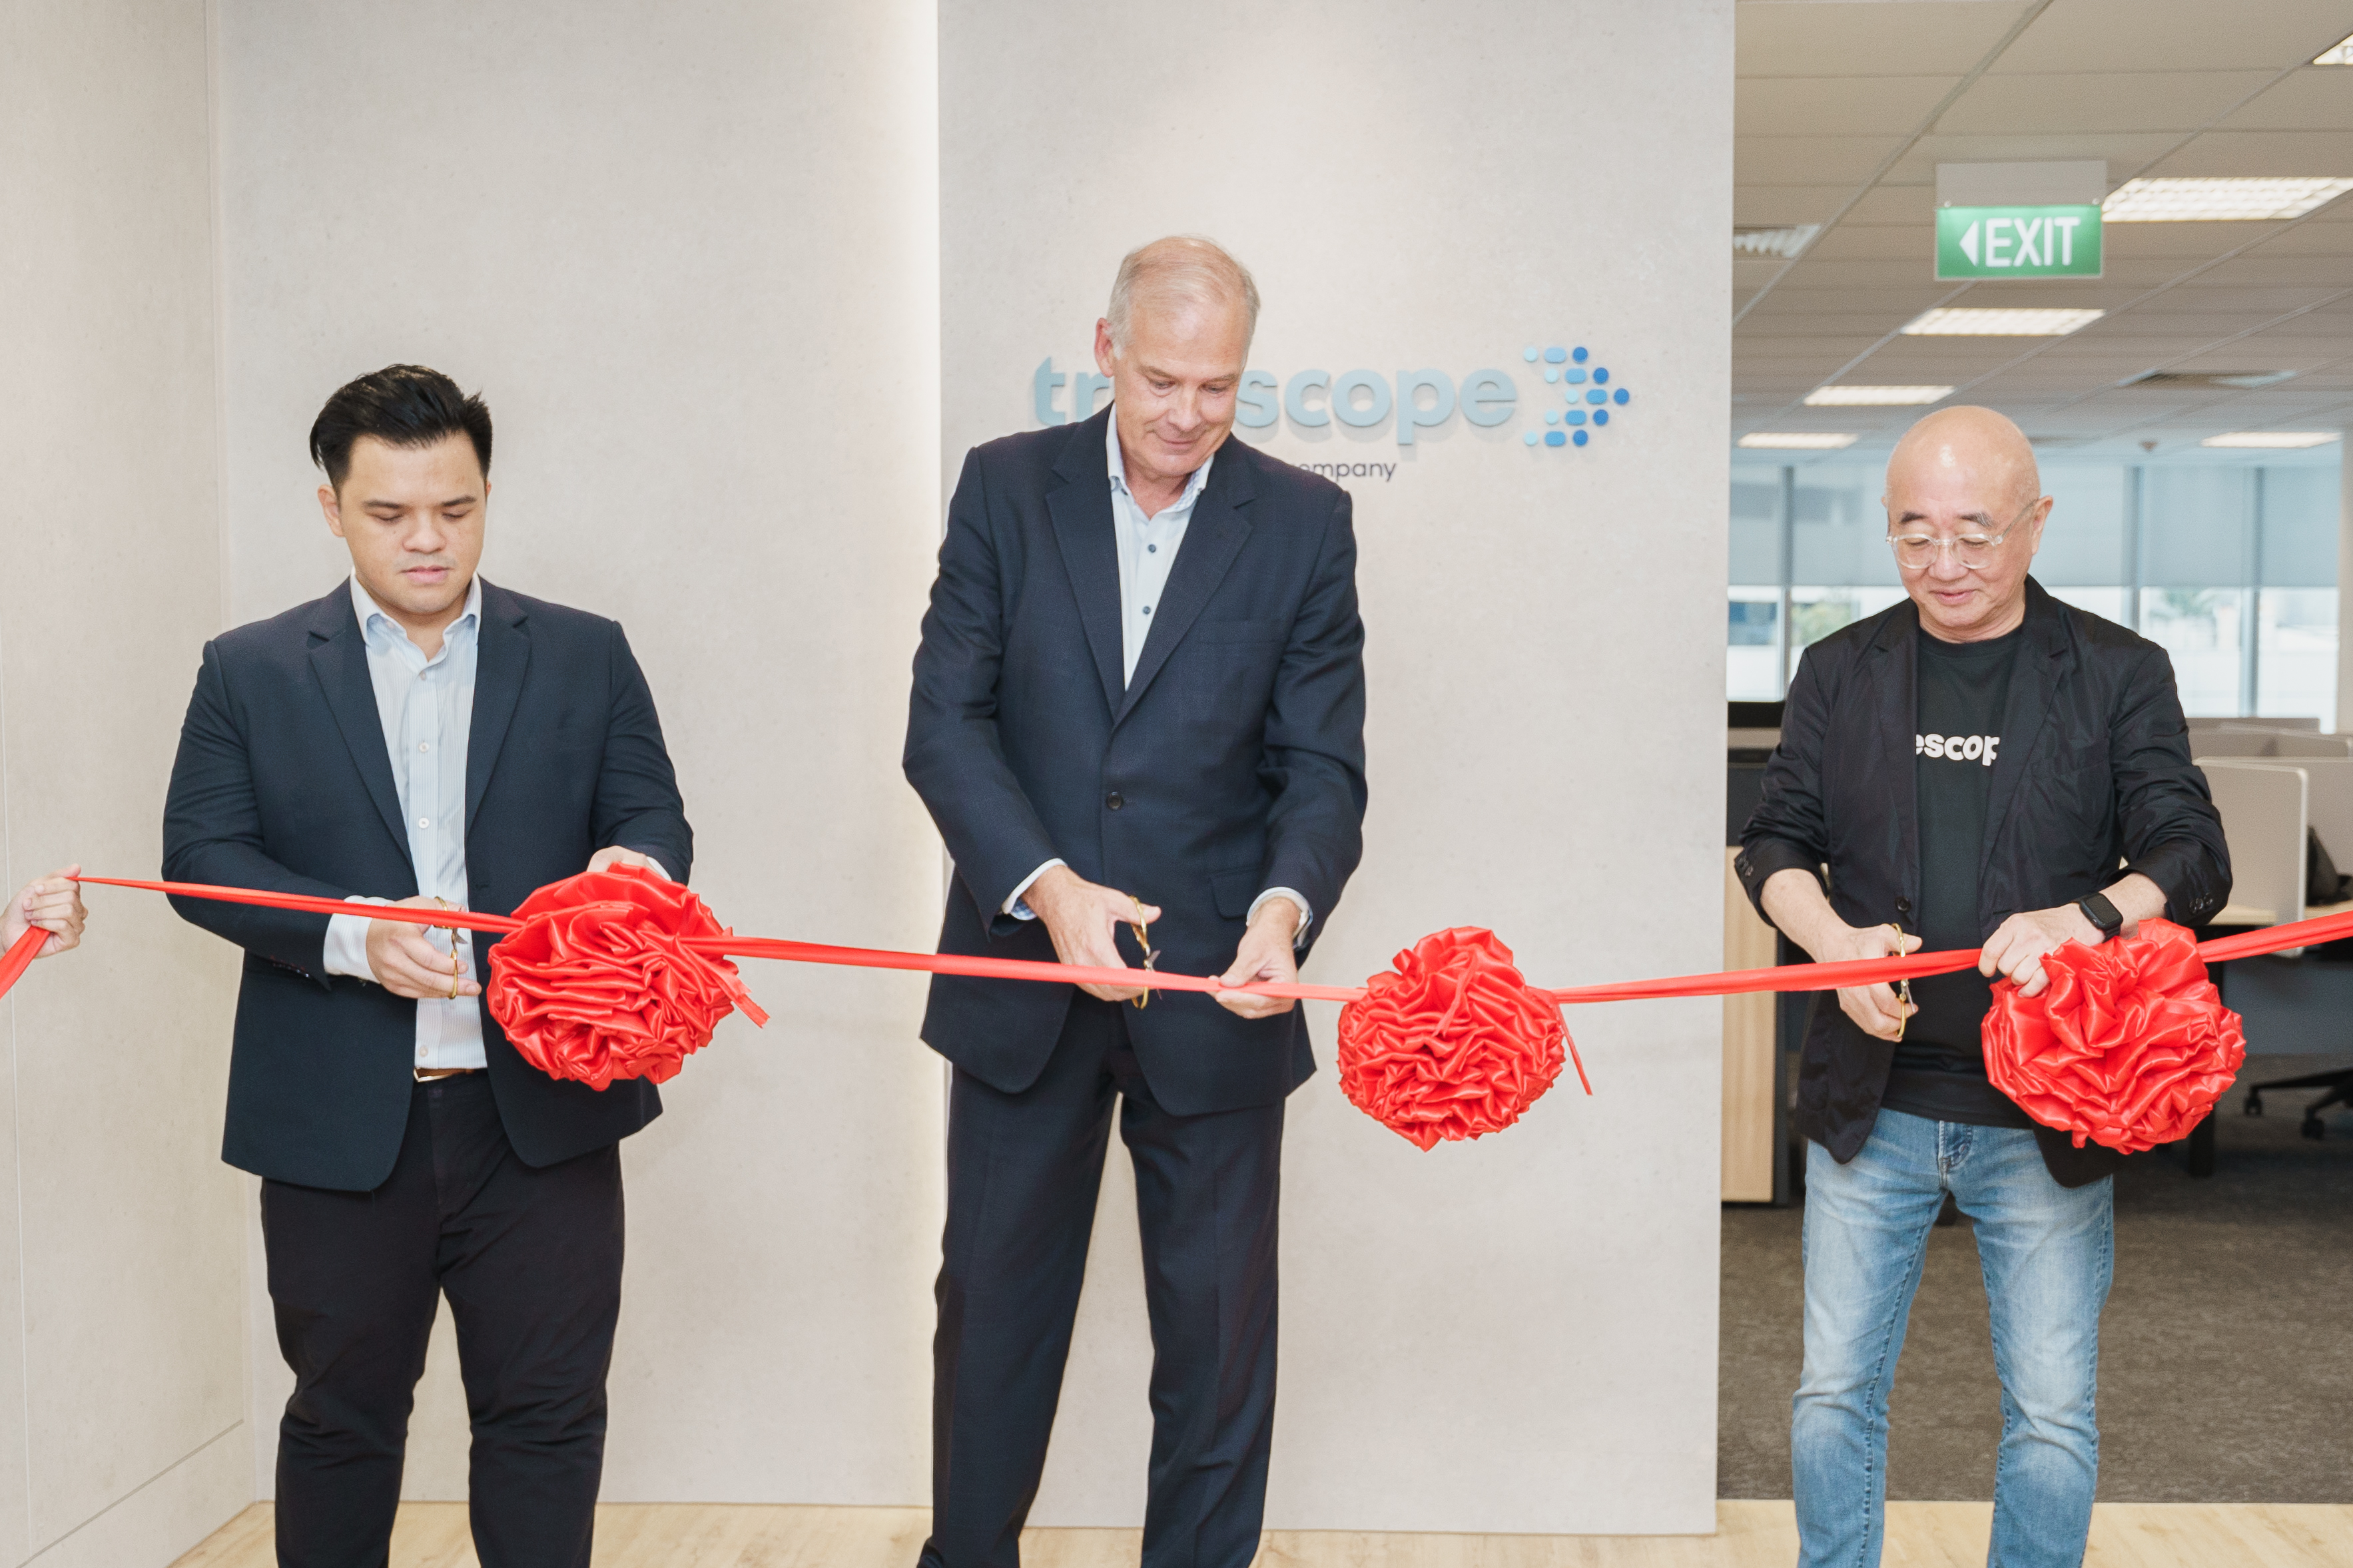 Ribbon-cutting ceremony during the grand opening of Truescope Singapore's new office along Scotts Road. (L-R Jason Lee, CEO of Truescope Singapore, John Croll, Co-Founder and CEO of Truescope and David Liu, Co-Founder and CEO of Dataxet)